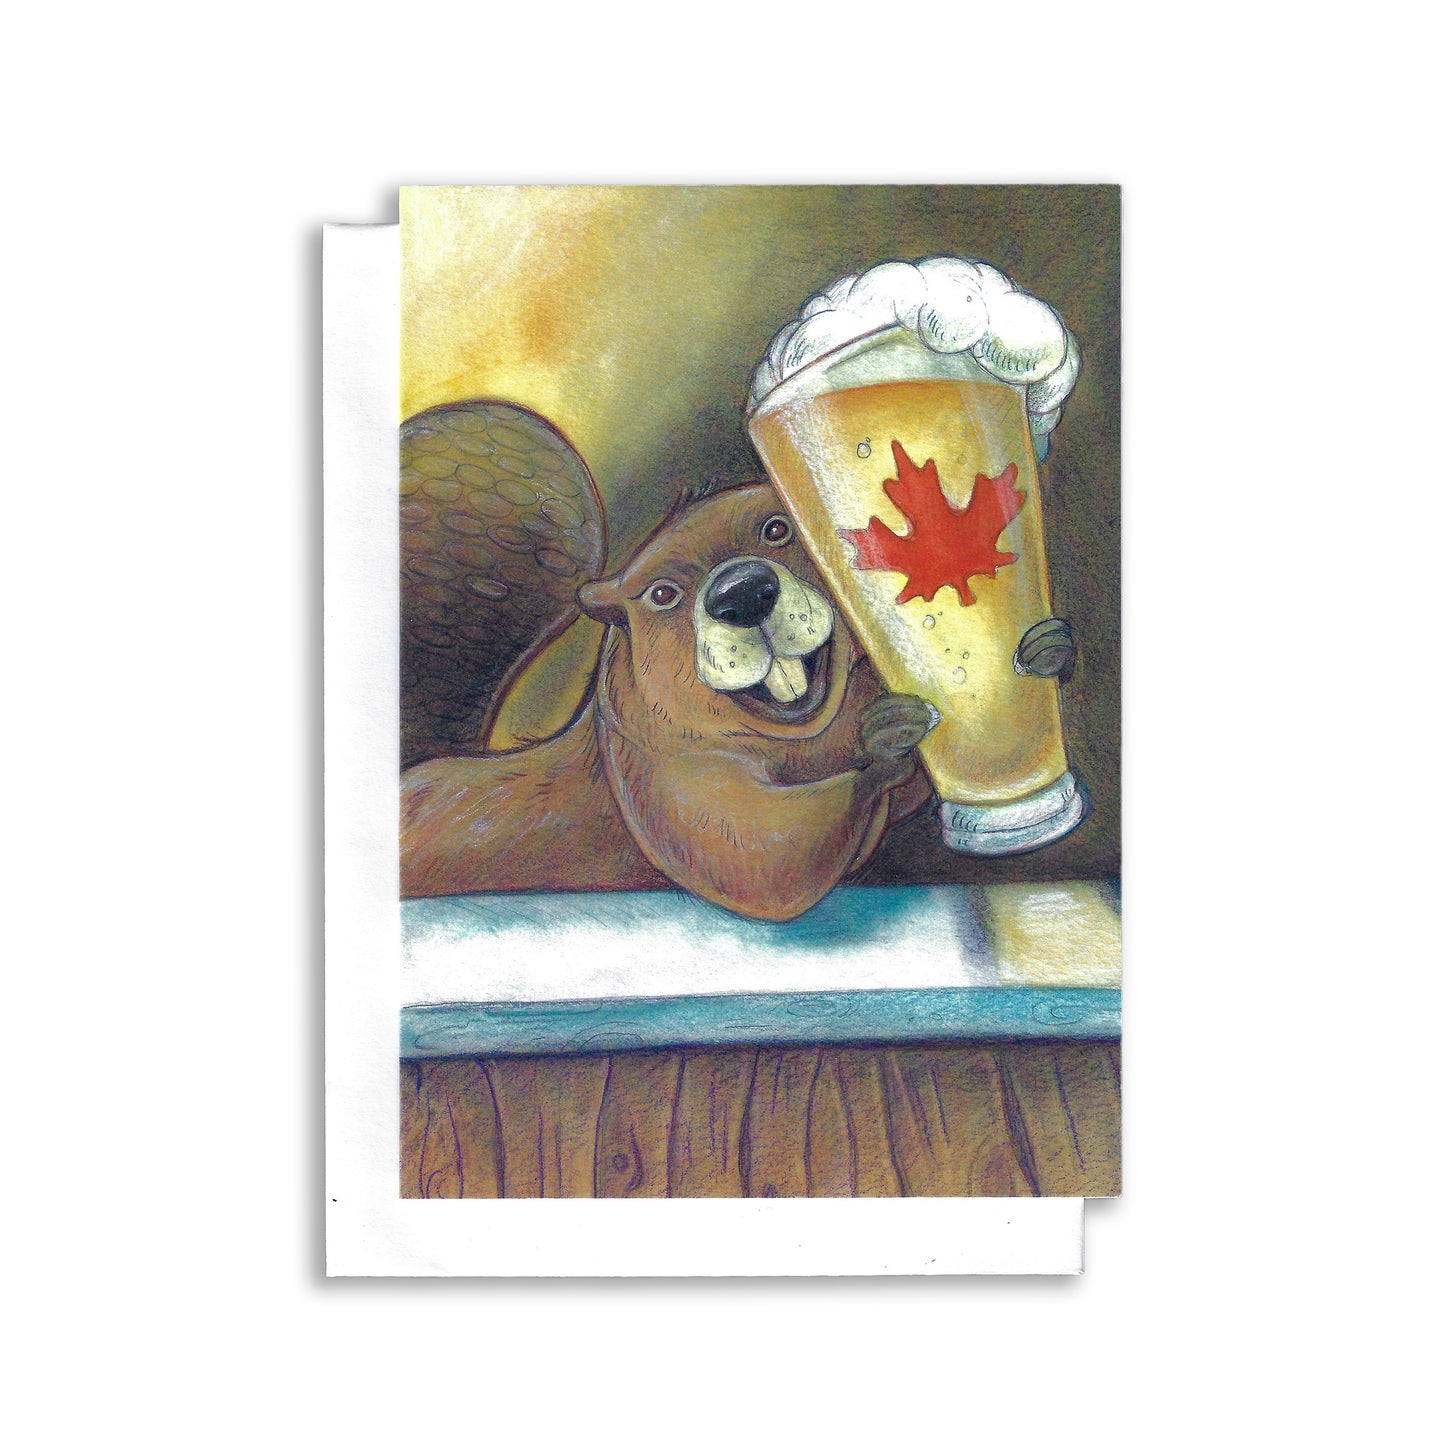 An illustrated Canadian themed greeting card. A beaver holds up a large glass of beer. There is a maple leaf on the glass.